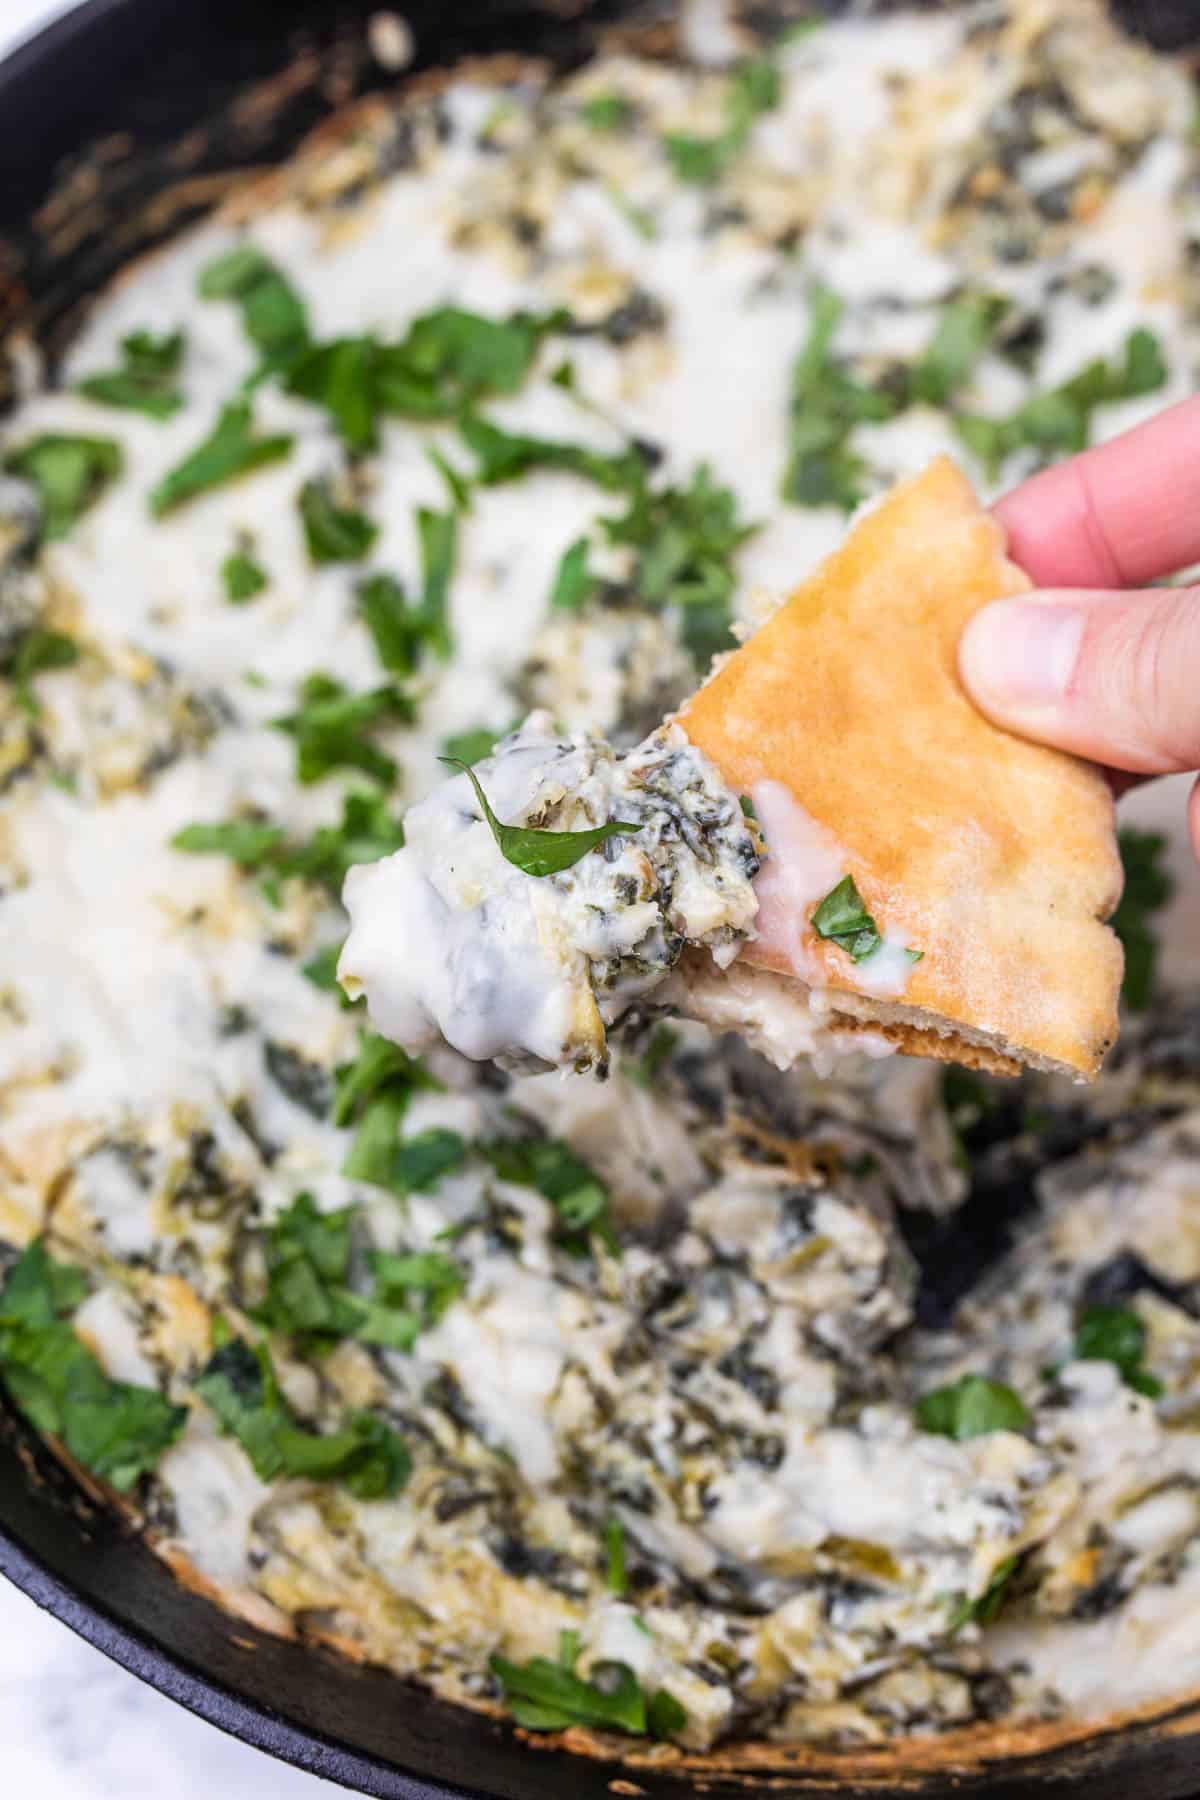 Hand scooping baked vegan spinach artichoke dip out of cast iron pan with piece of pita